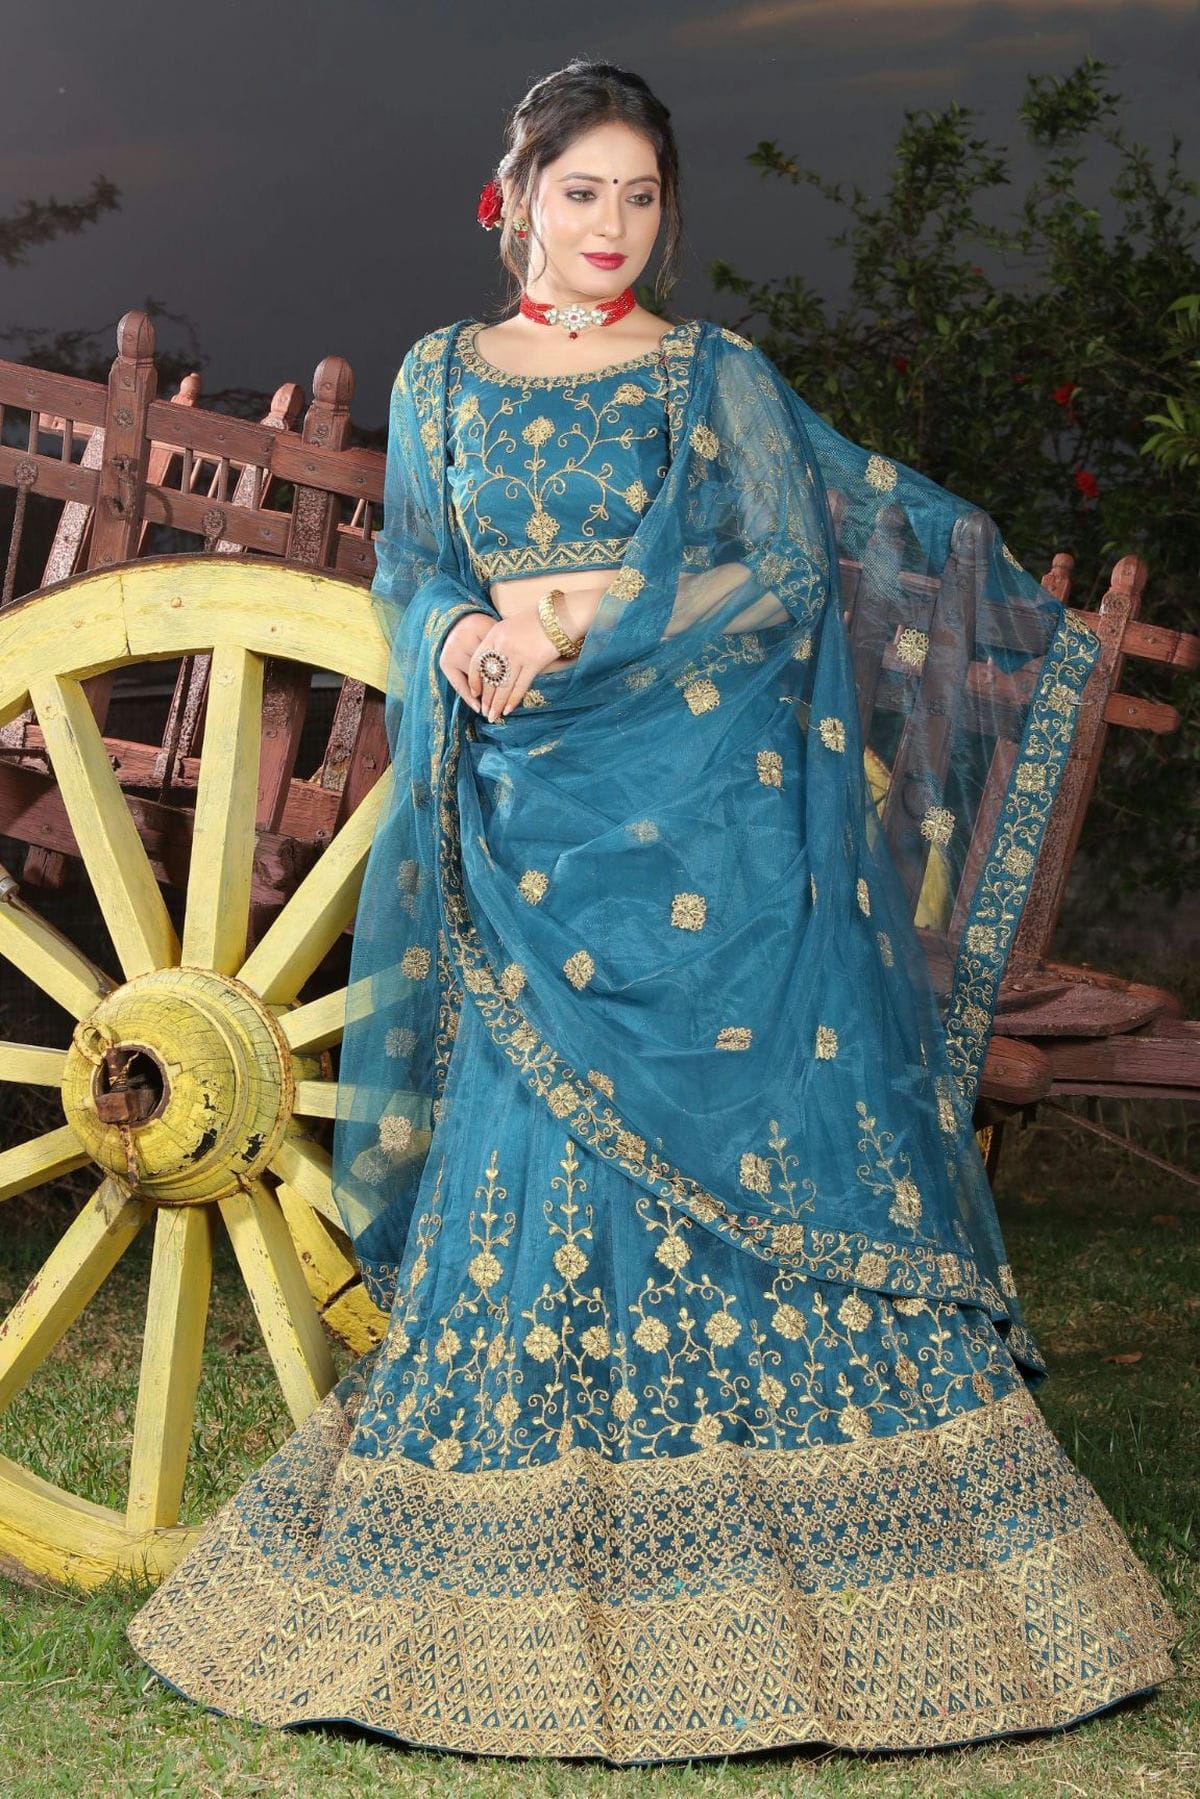 Butterfly Net Embroidery Lehenga Choli In Blue Colour LD054112227 A